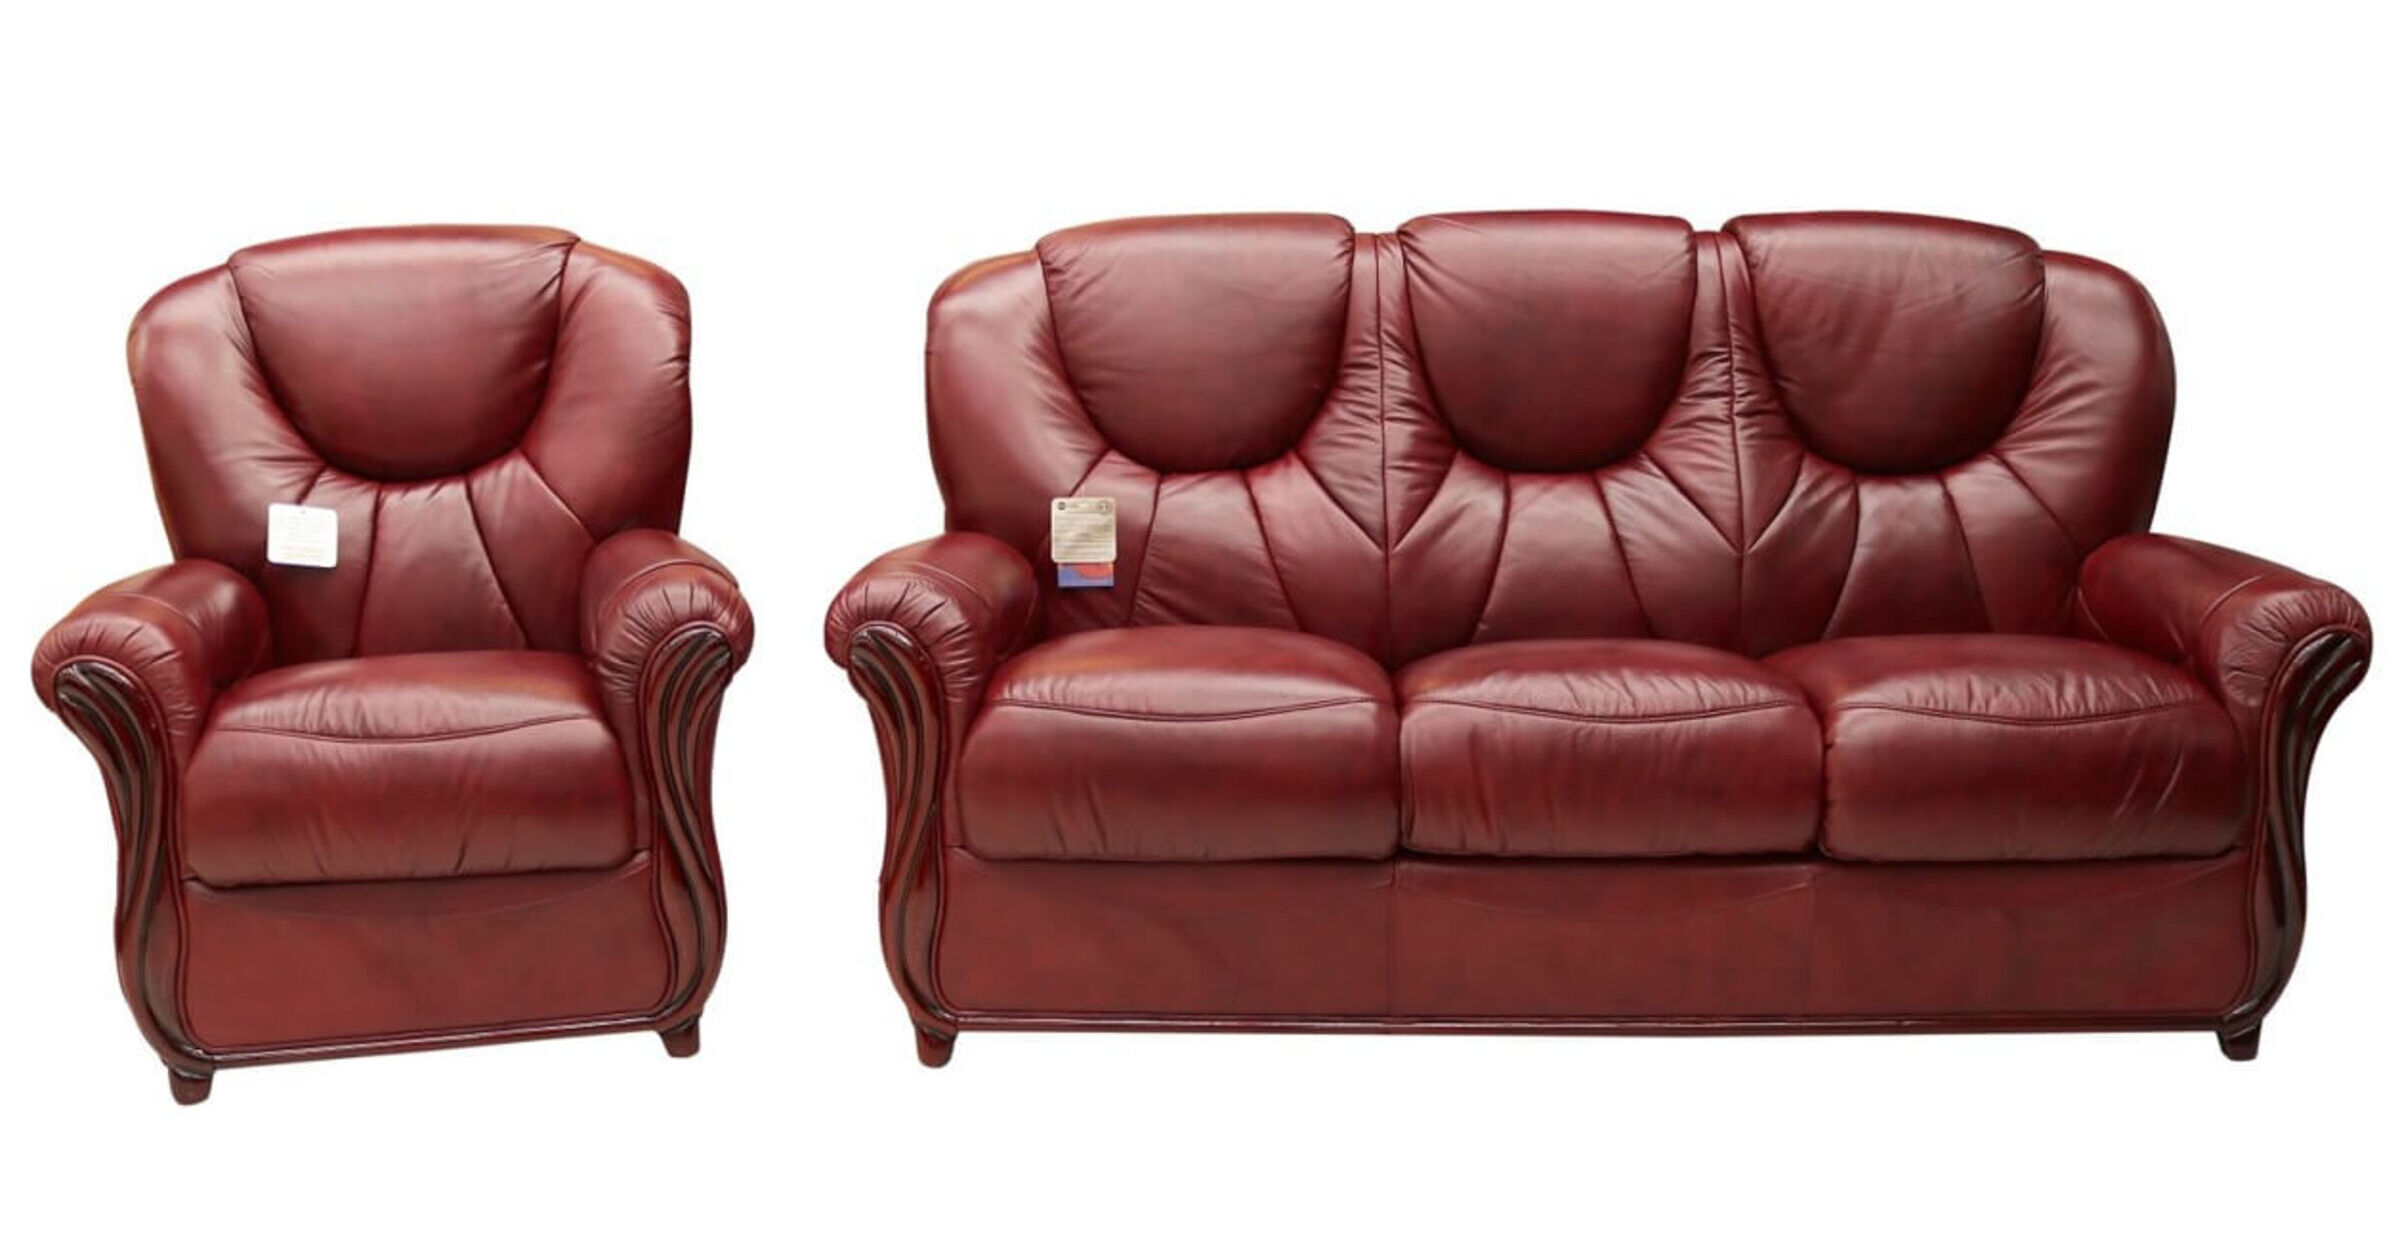 leather covered sofa buttons burgandy